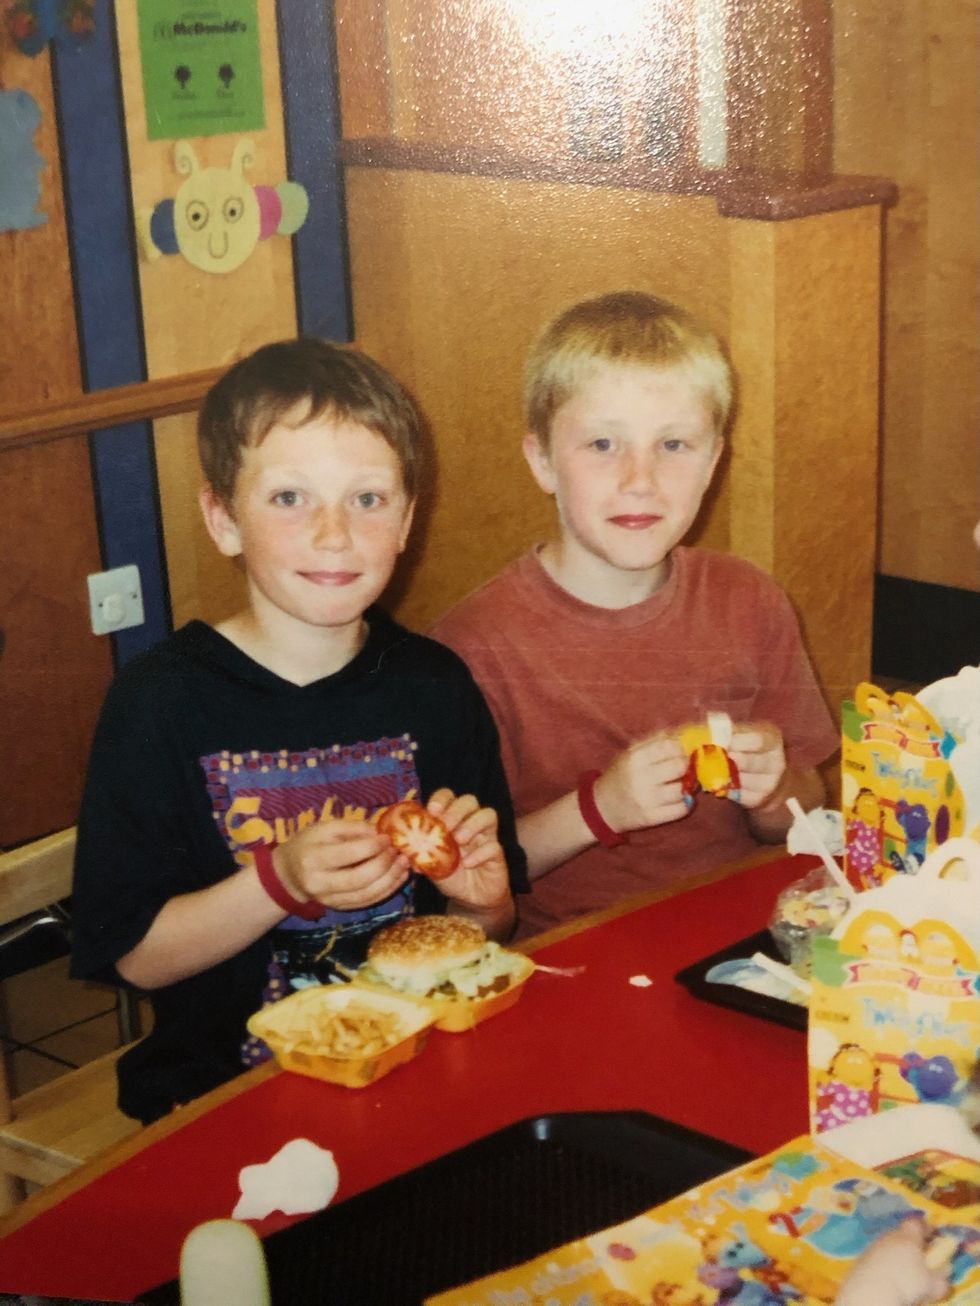 Old family photo of two boys eating lunch together